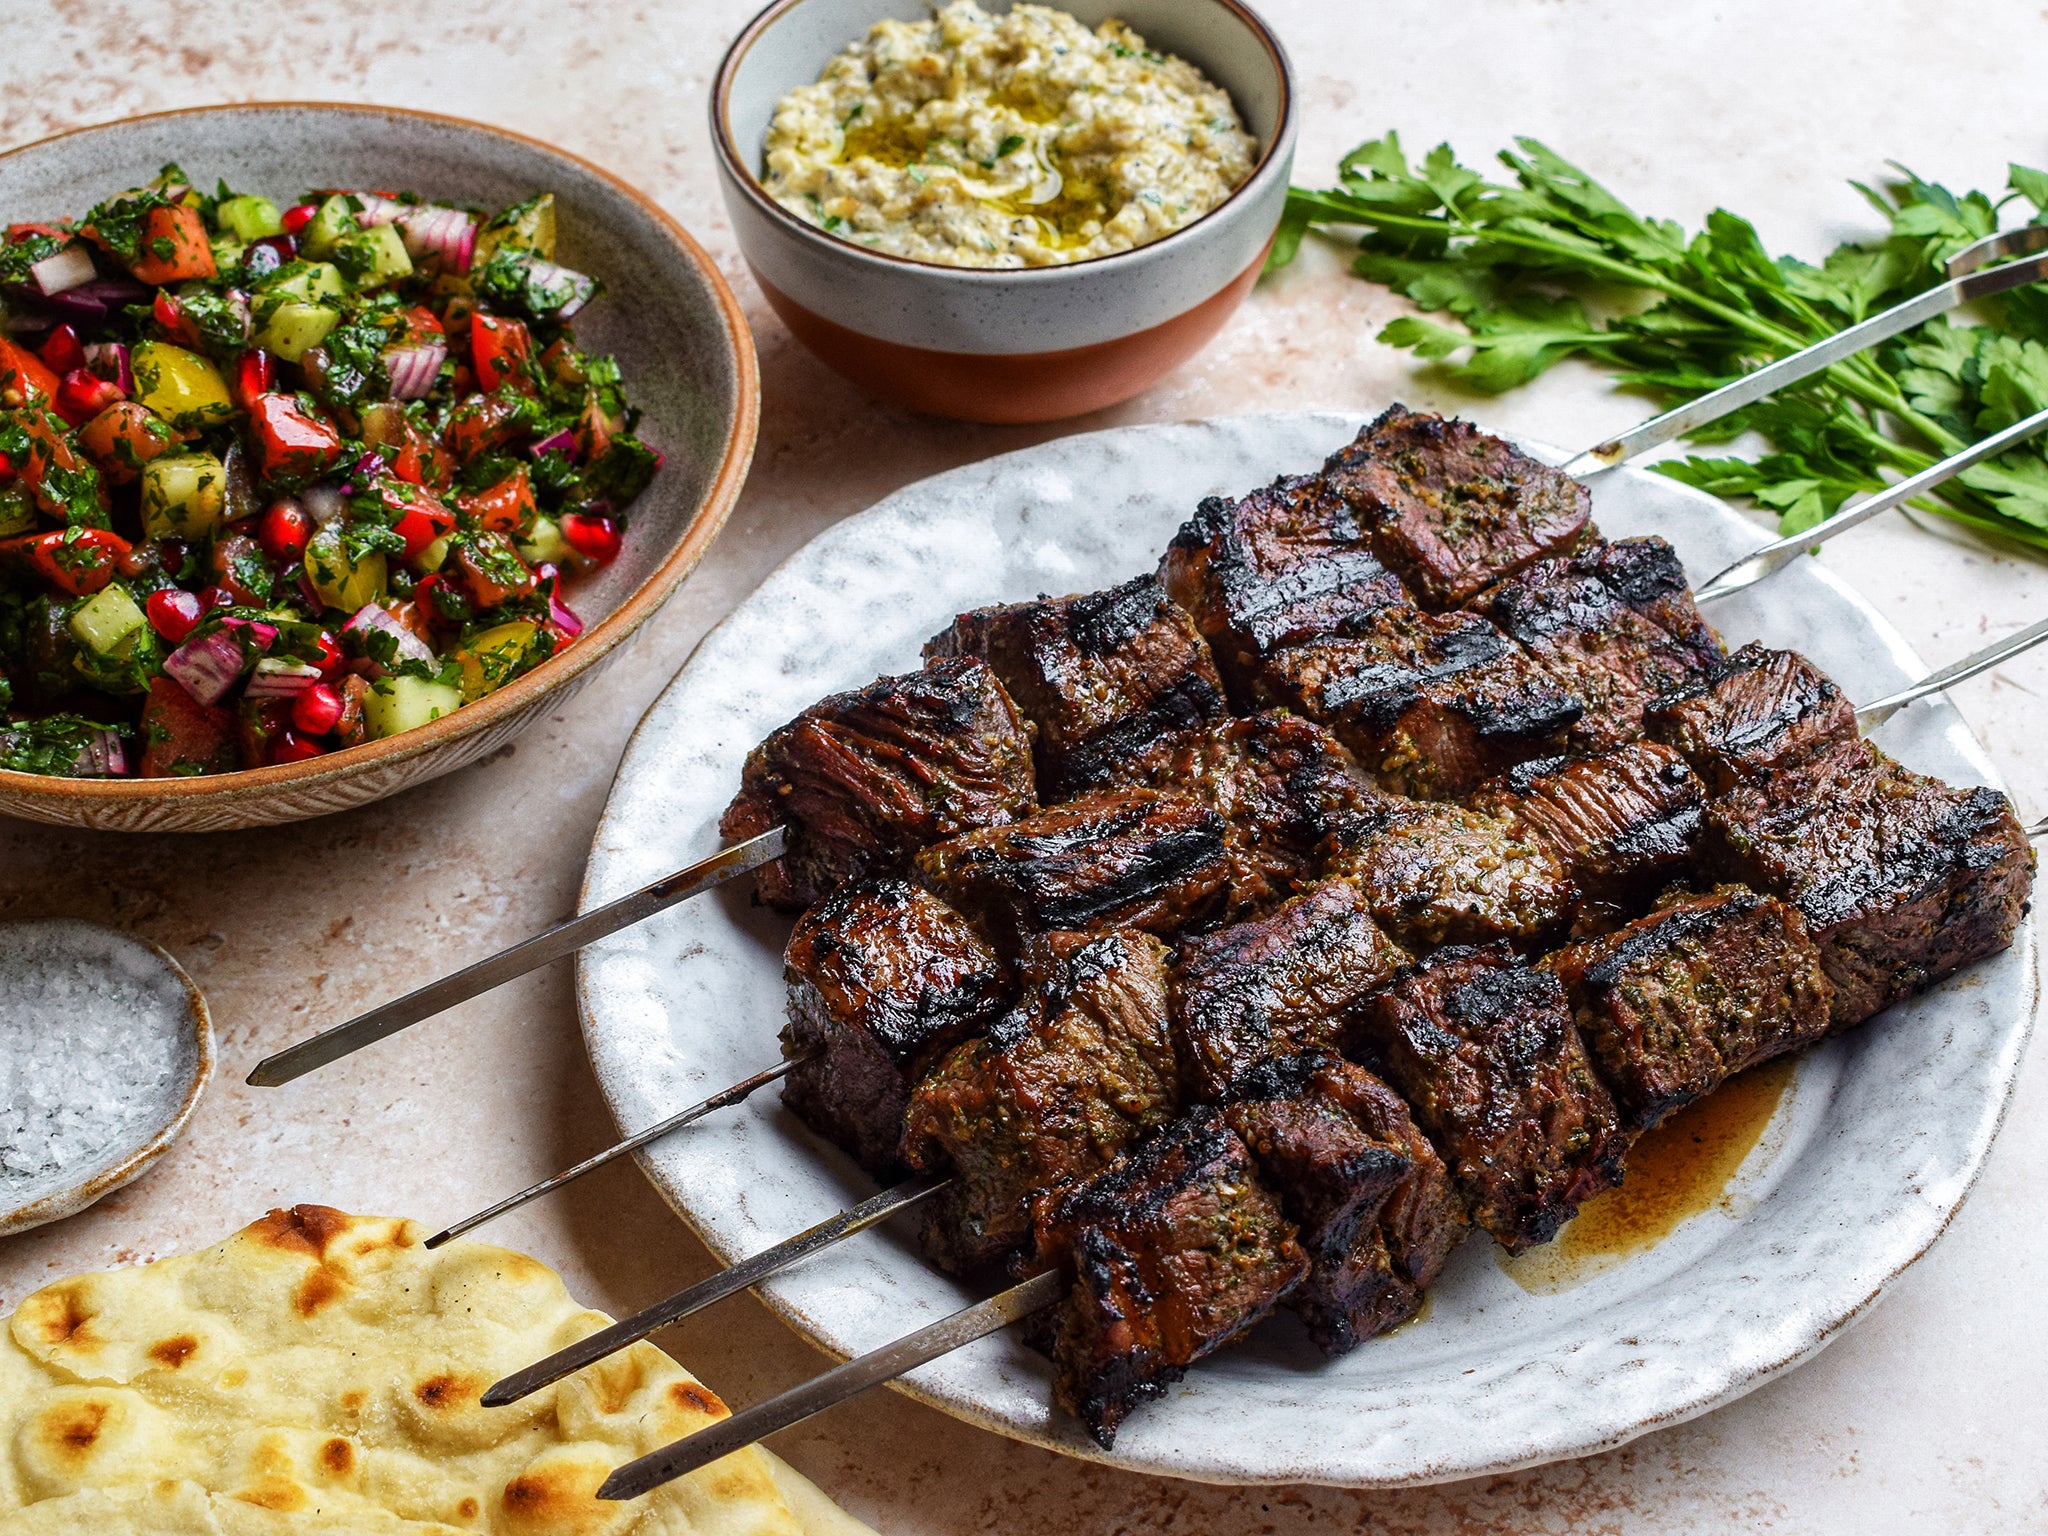 With a balance of bold, tangy and refreshing tastes, this dish showcases the depth of Persian culinary traditions